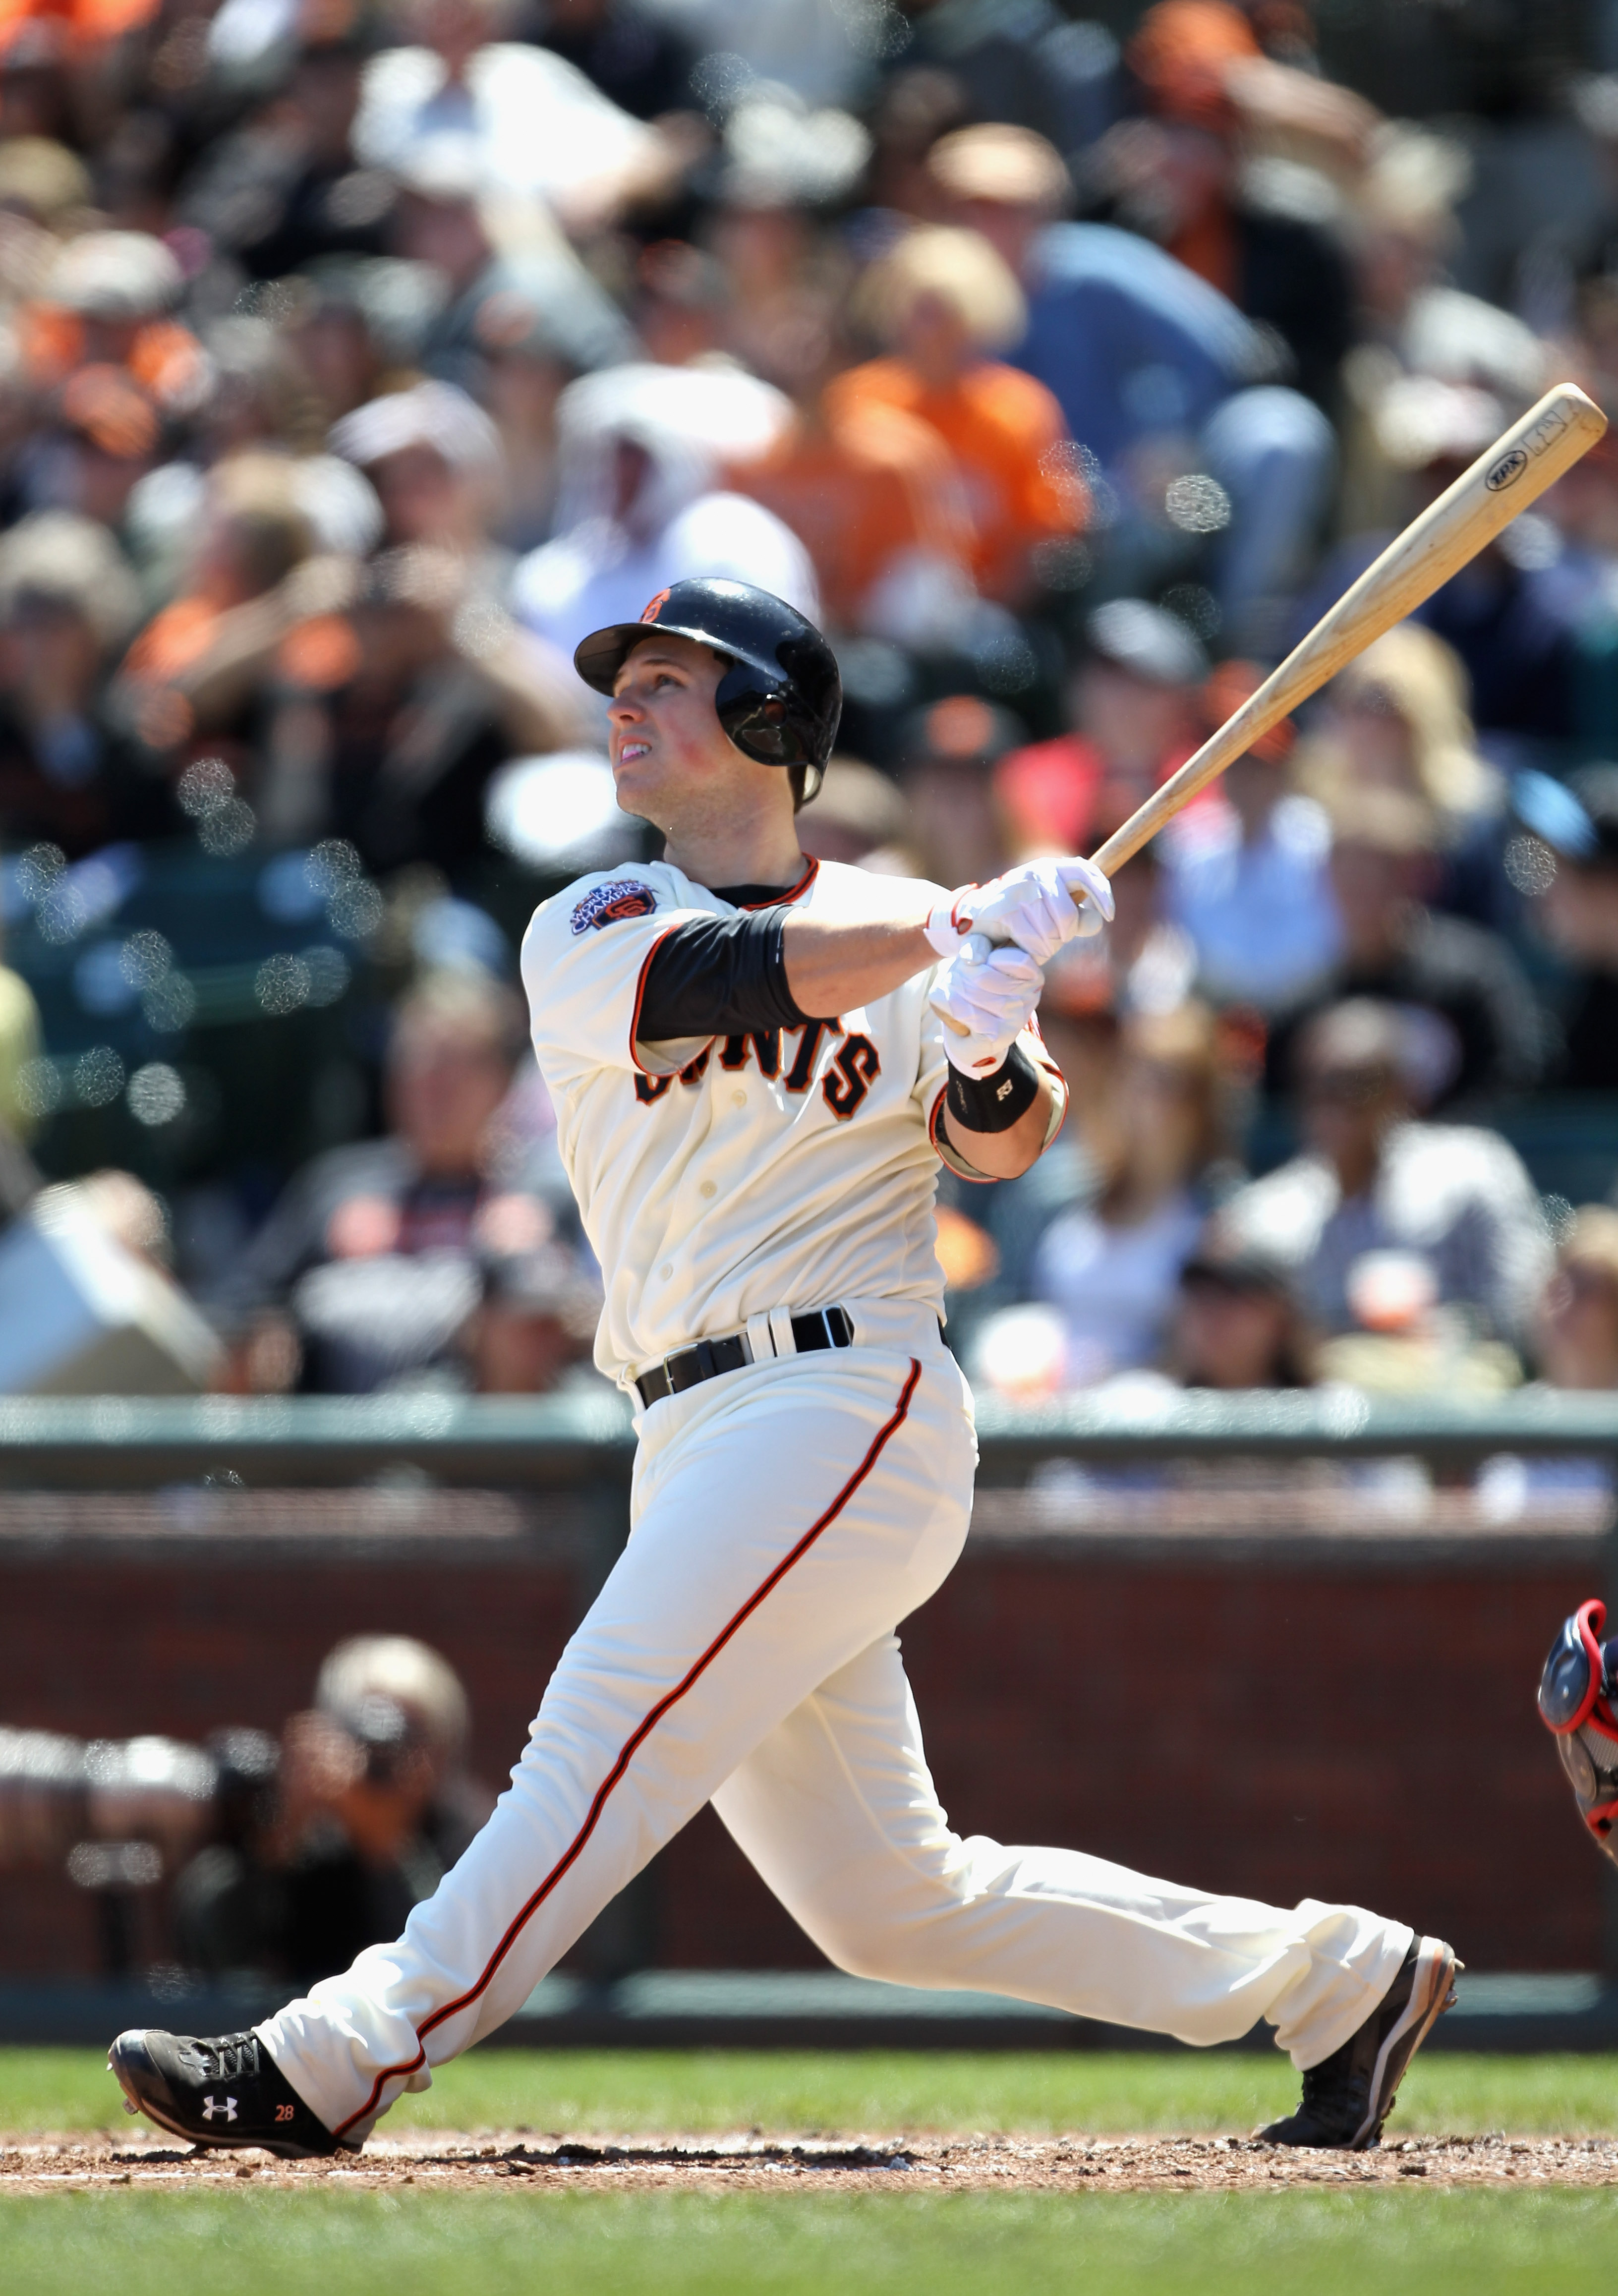 SAN FRANCISCO, CA - APRIL 24:  Buster Posey #28 of the San Francisco Giants hits a two run home run in the fourth inning outfield their game against the Atlanta Braves at AT&T Park on April 24, 2011 in San Francisco, California.  (Photo by Ezra Shaw/Getty